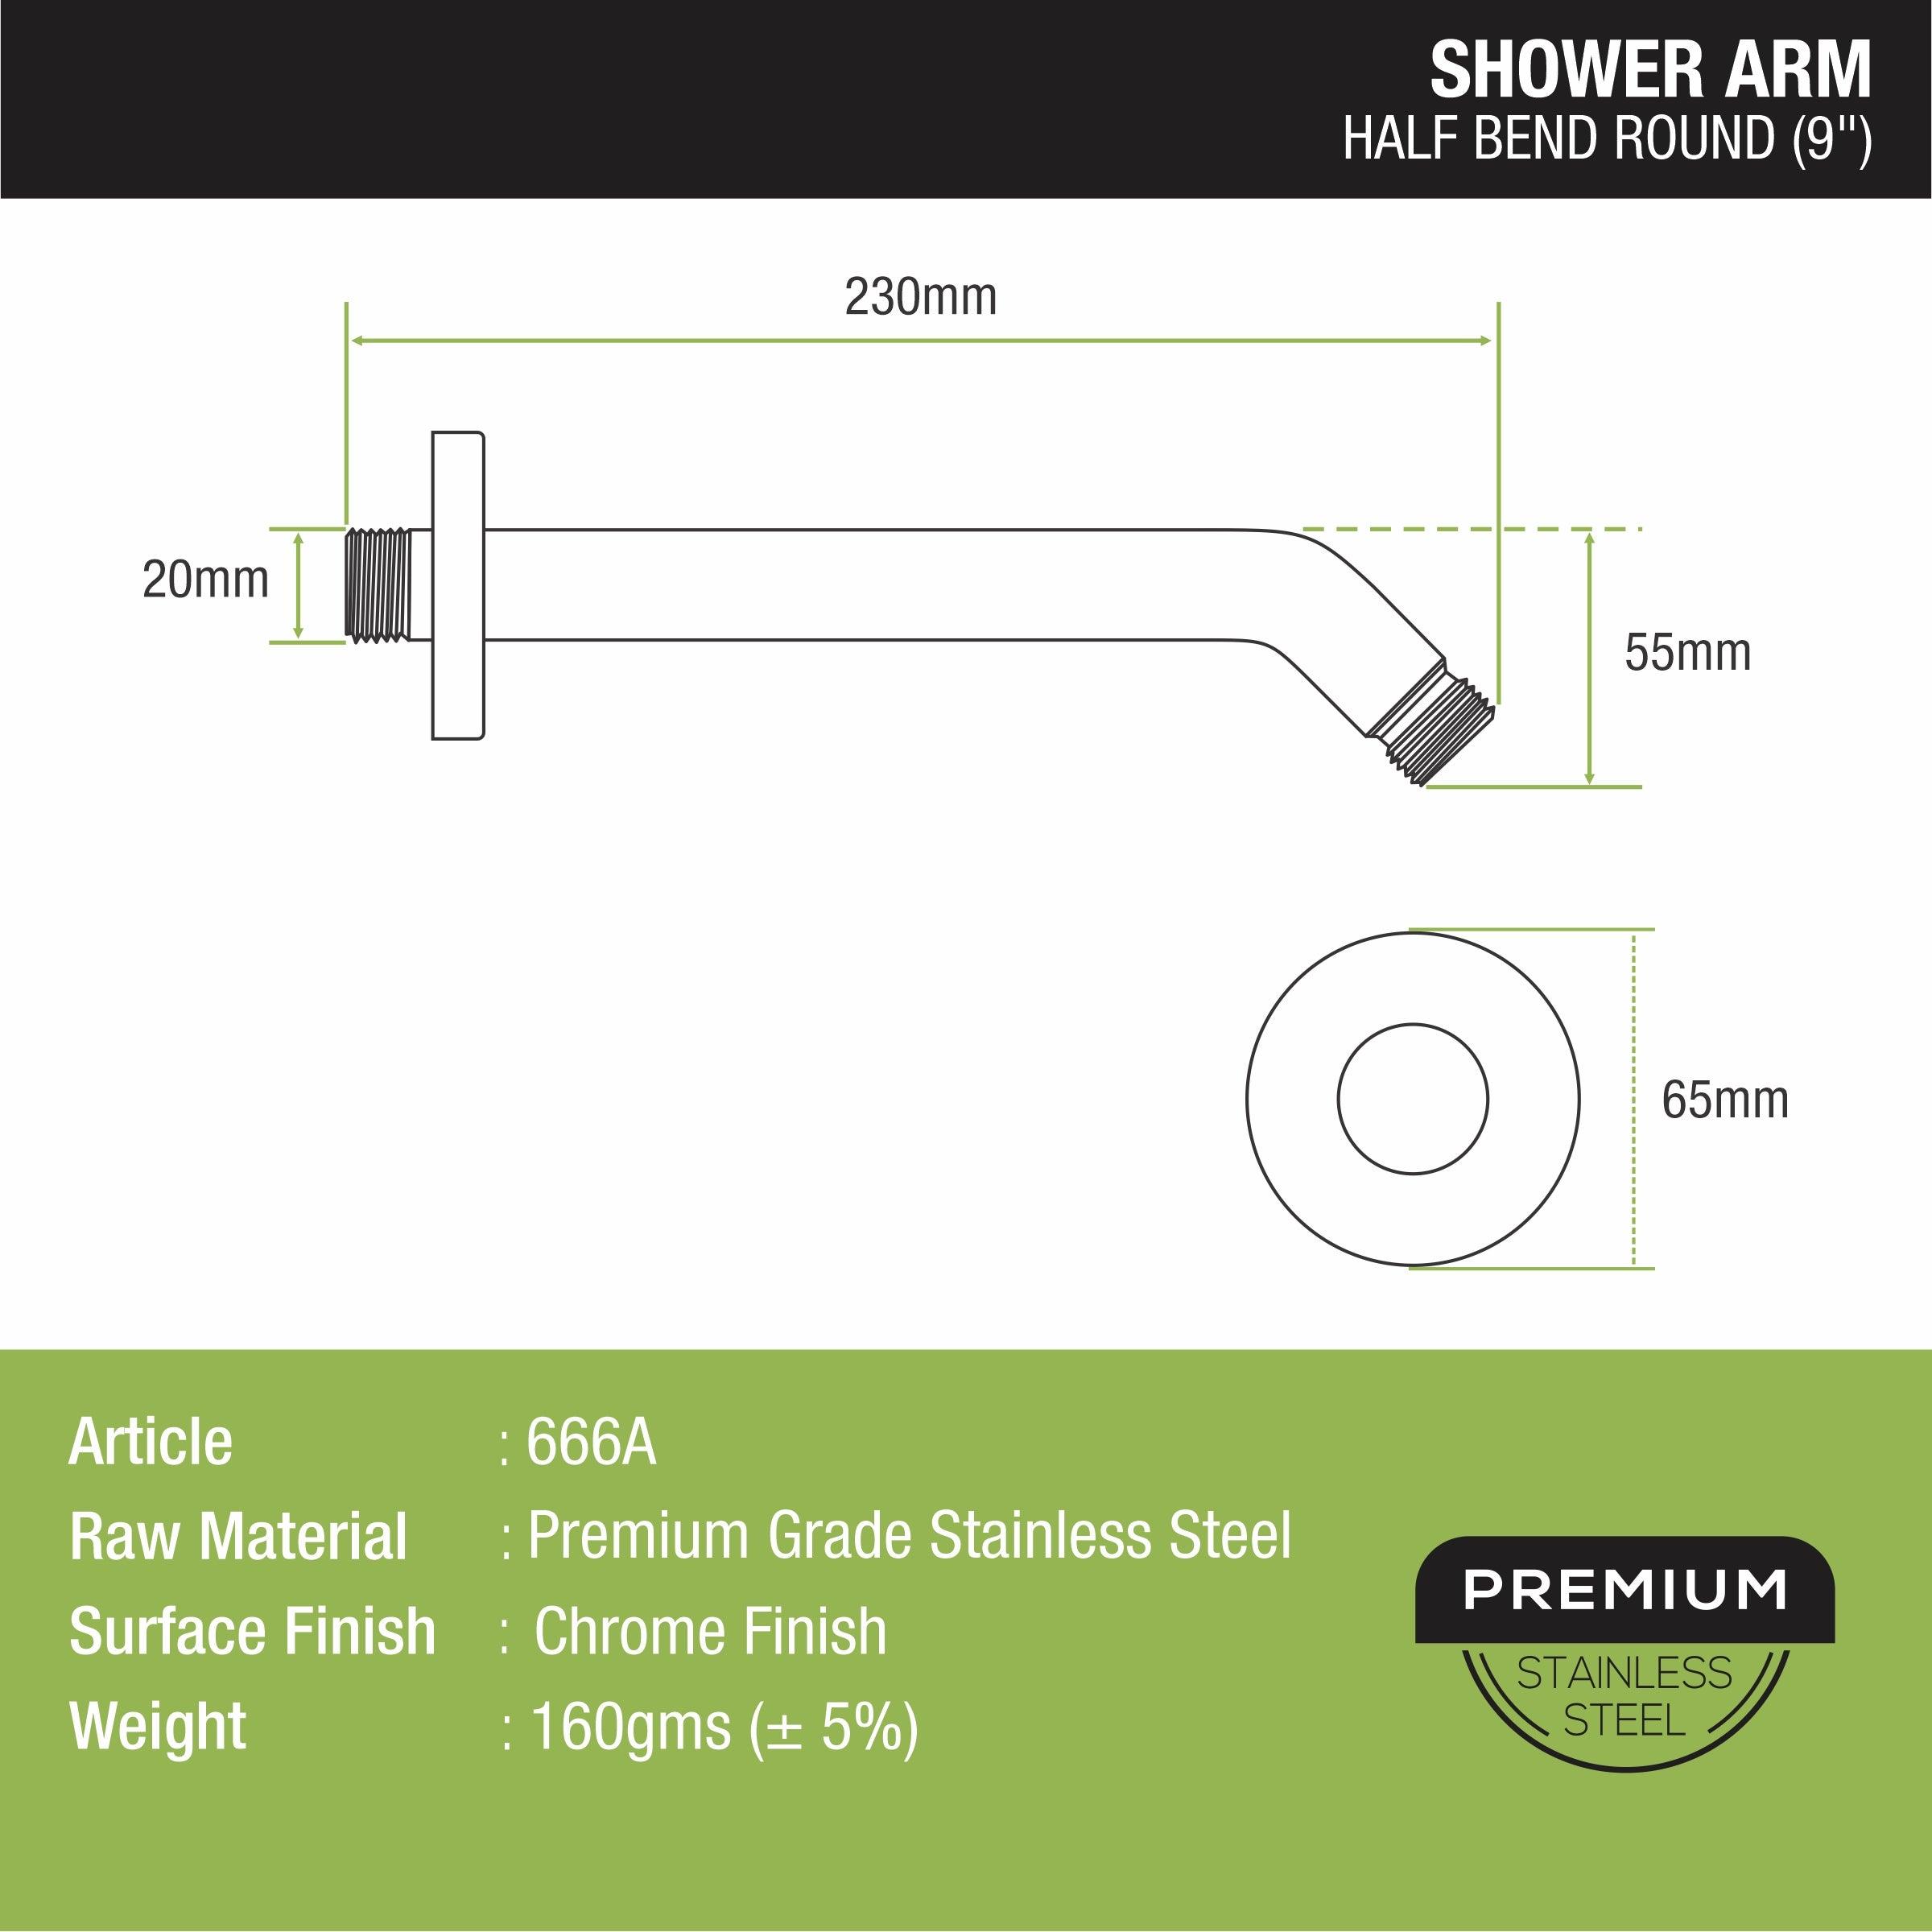 Half Bend Round Shower Arm (9 Inches) sizes and dimensions